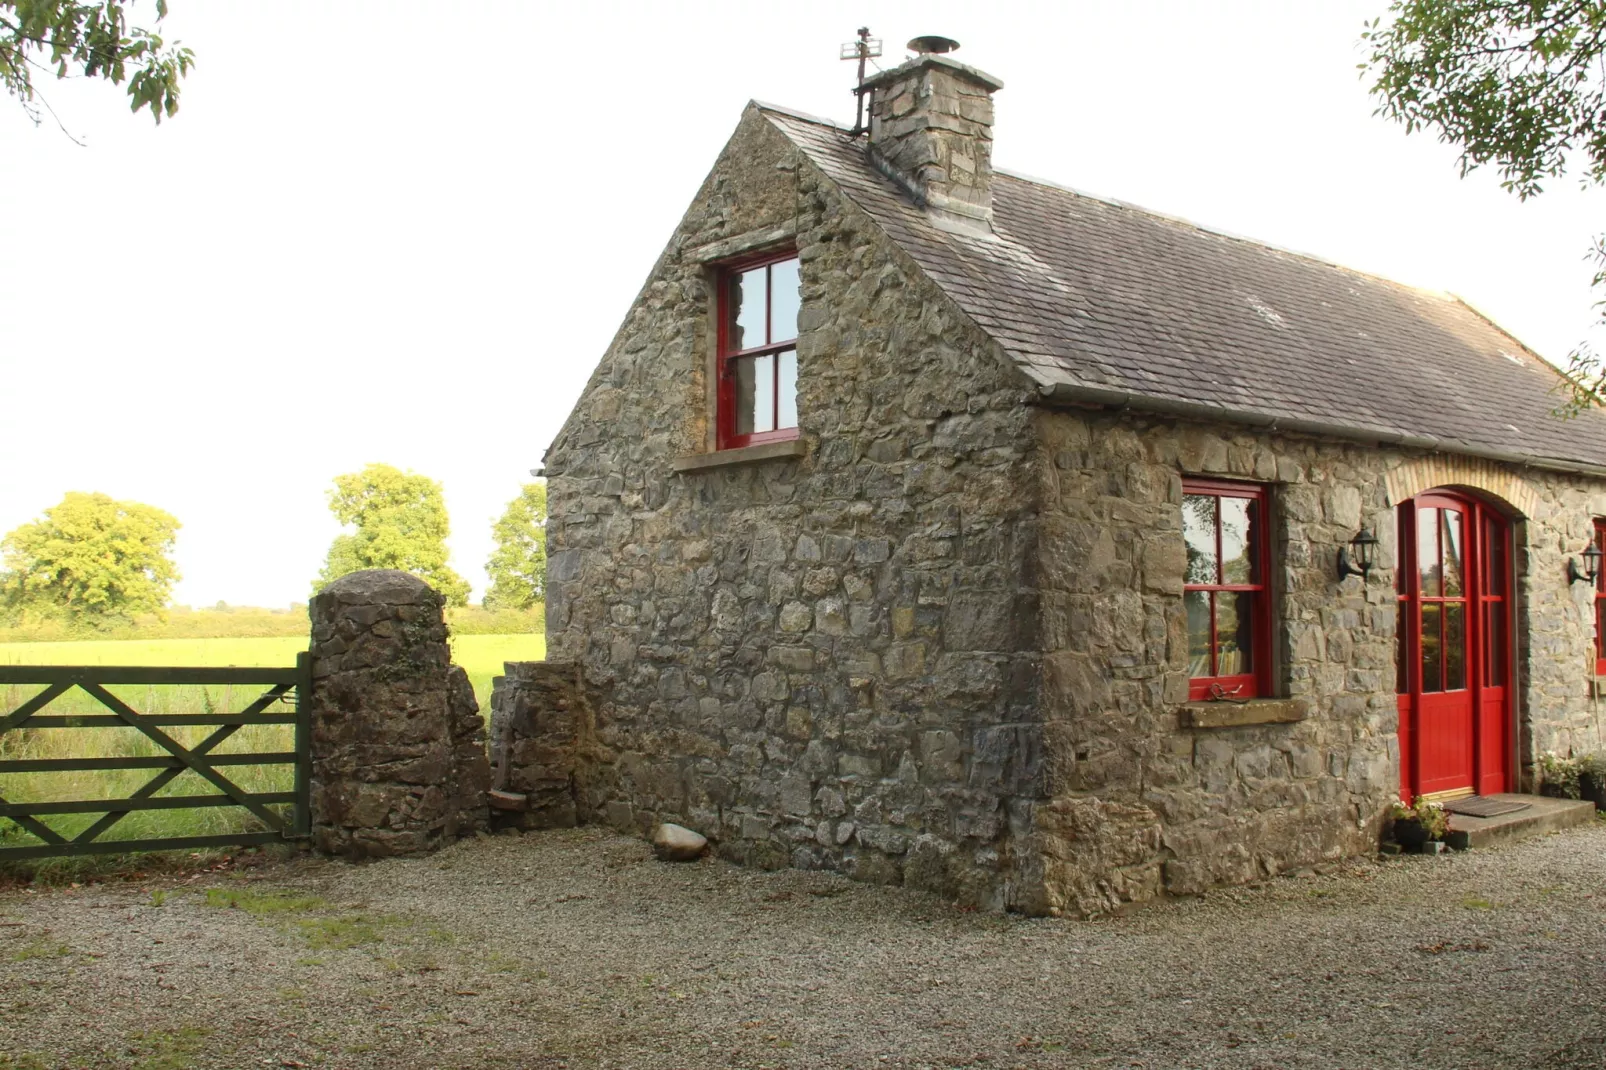 Semi-detached house The Granary in Terryglass Co Tipperary-Sfeer